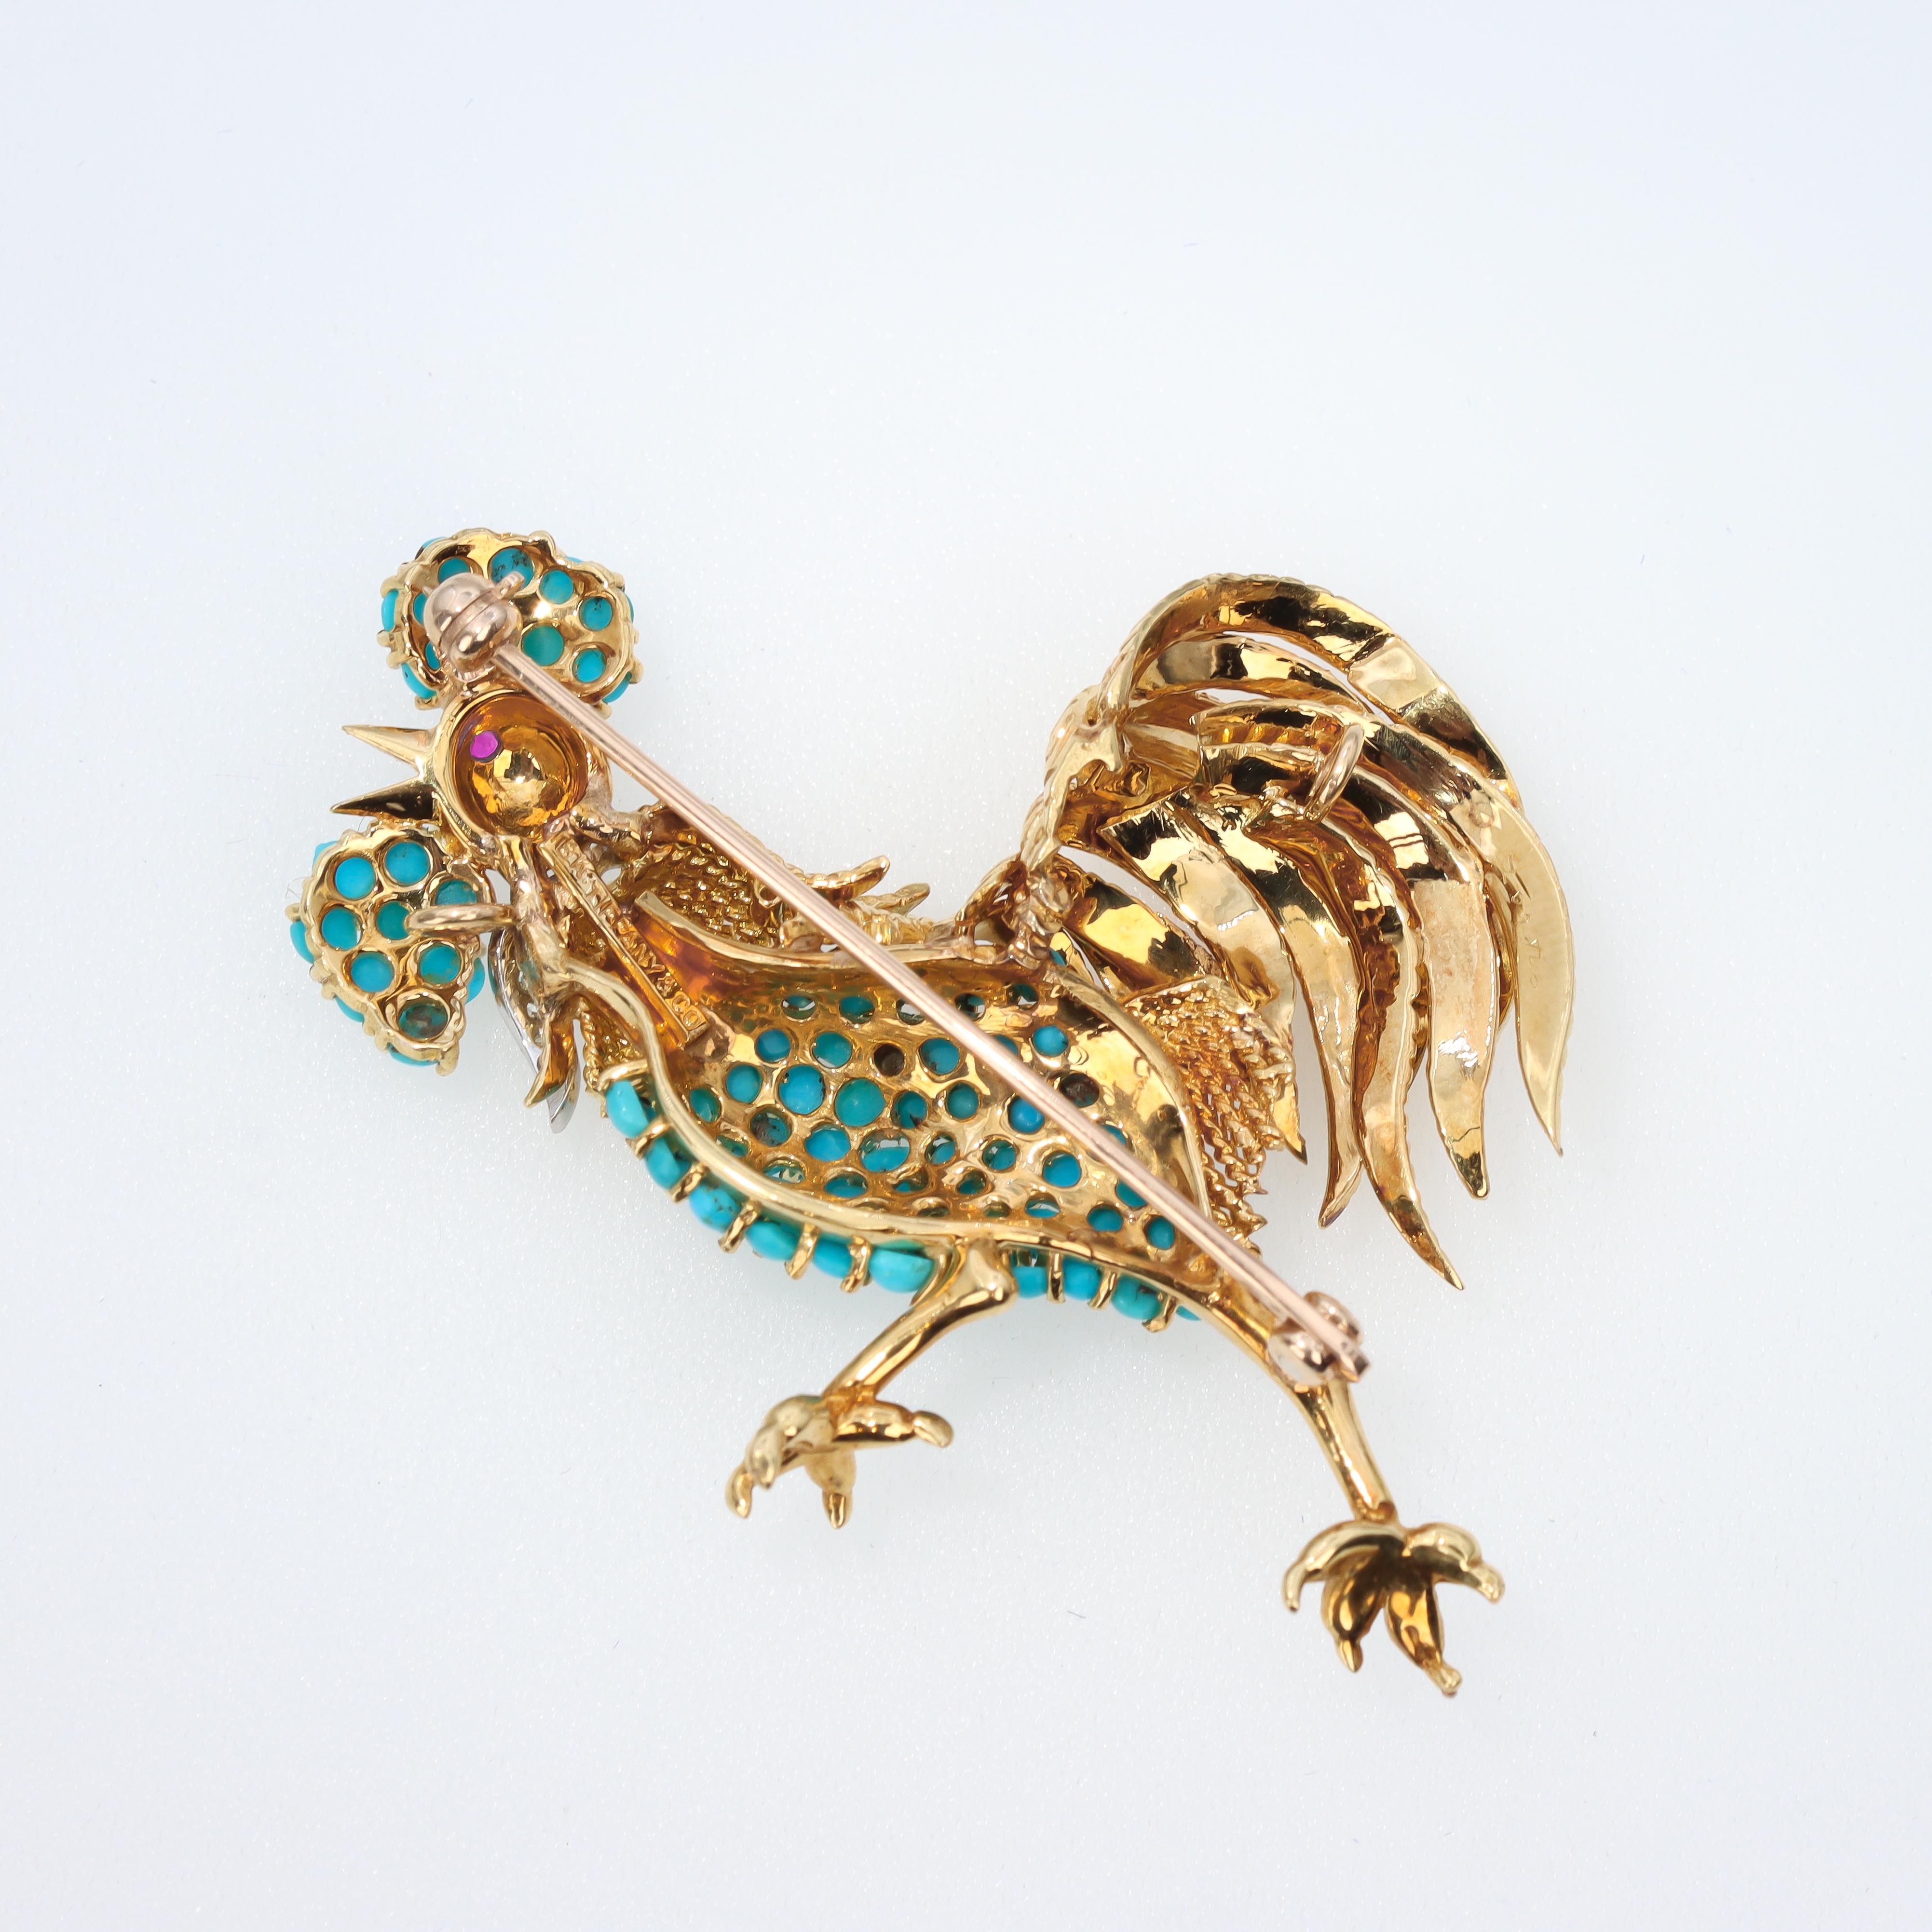 Modern Tiffany & Co. Rare 18K Gold Turquoise and Diamond Chanticleer / Rooster Brooch